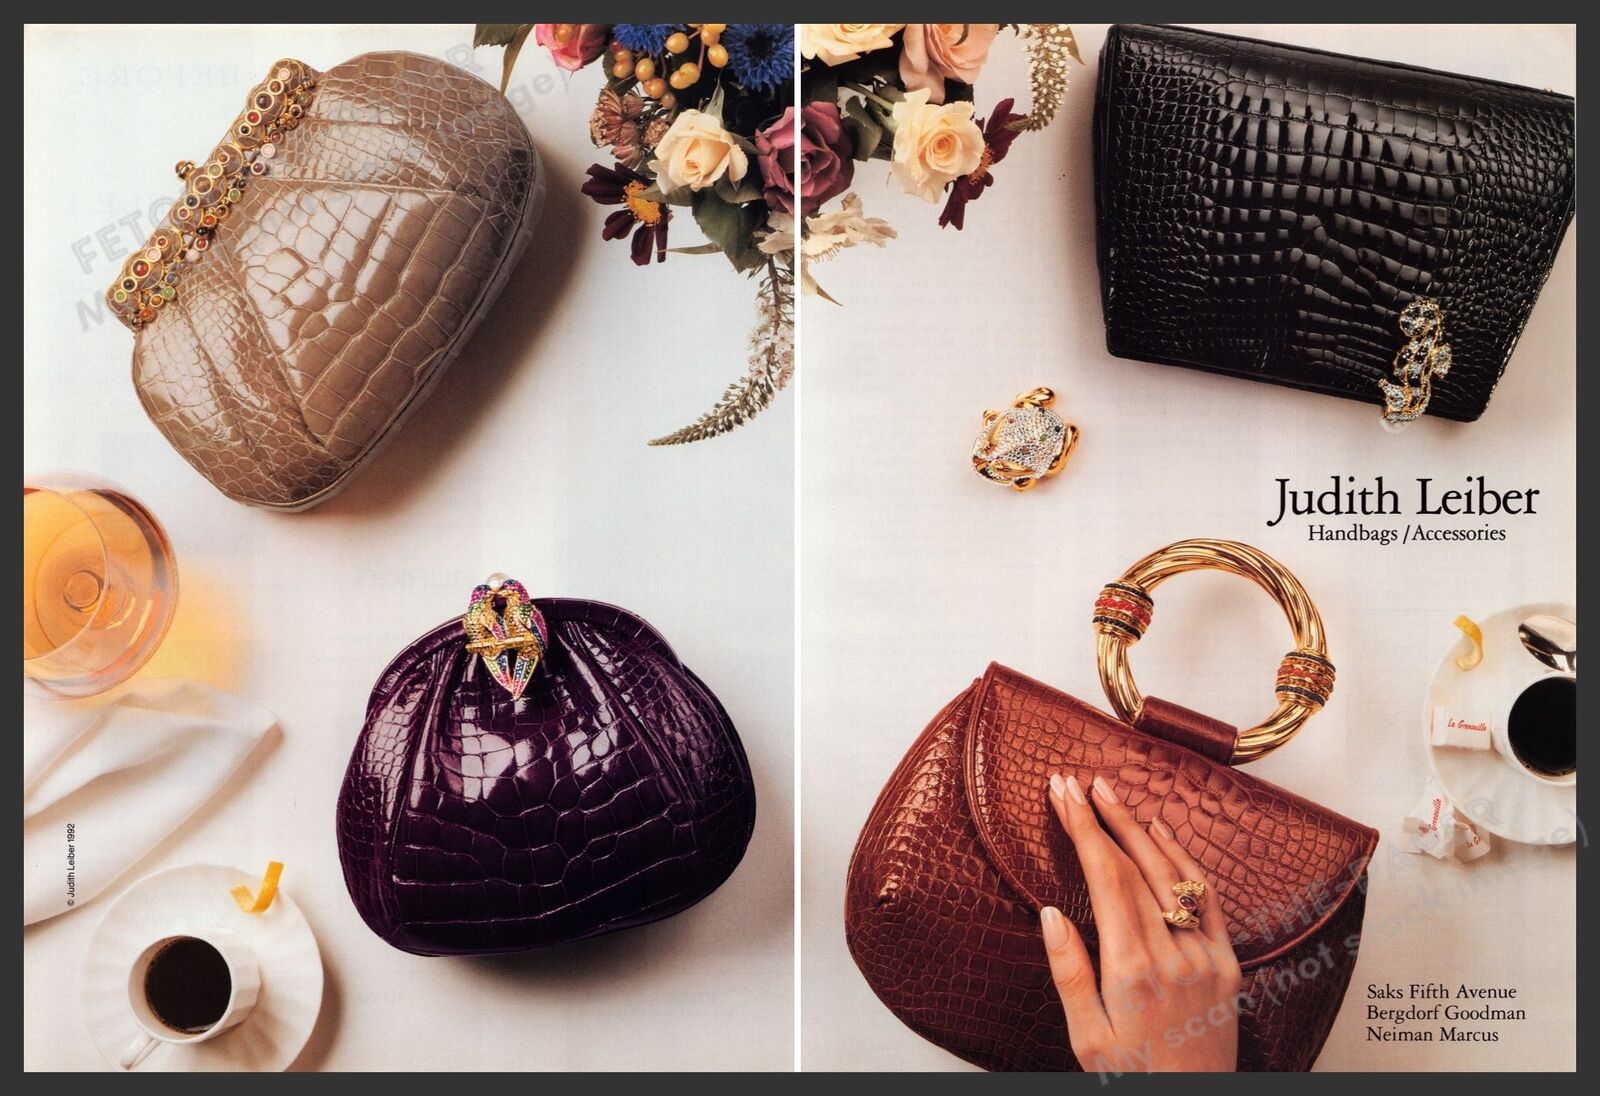 Judith Leiber Handbags & Accessories 1990s Print Advertisement (2 pages) 1992